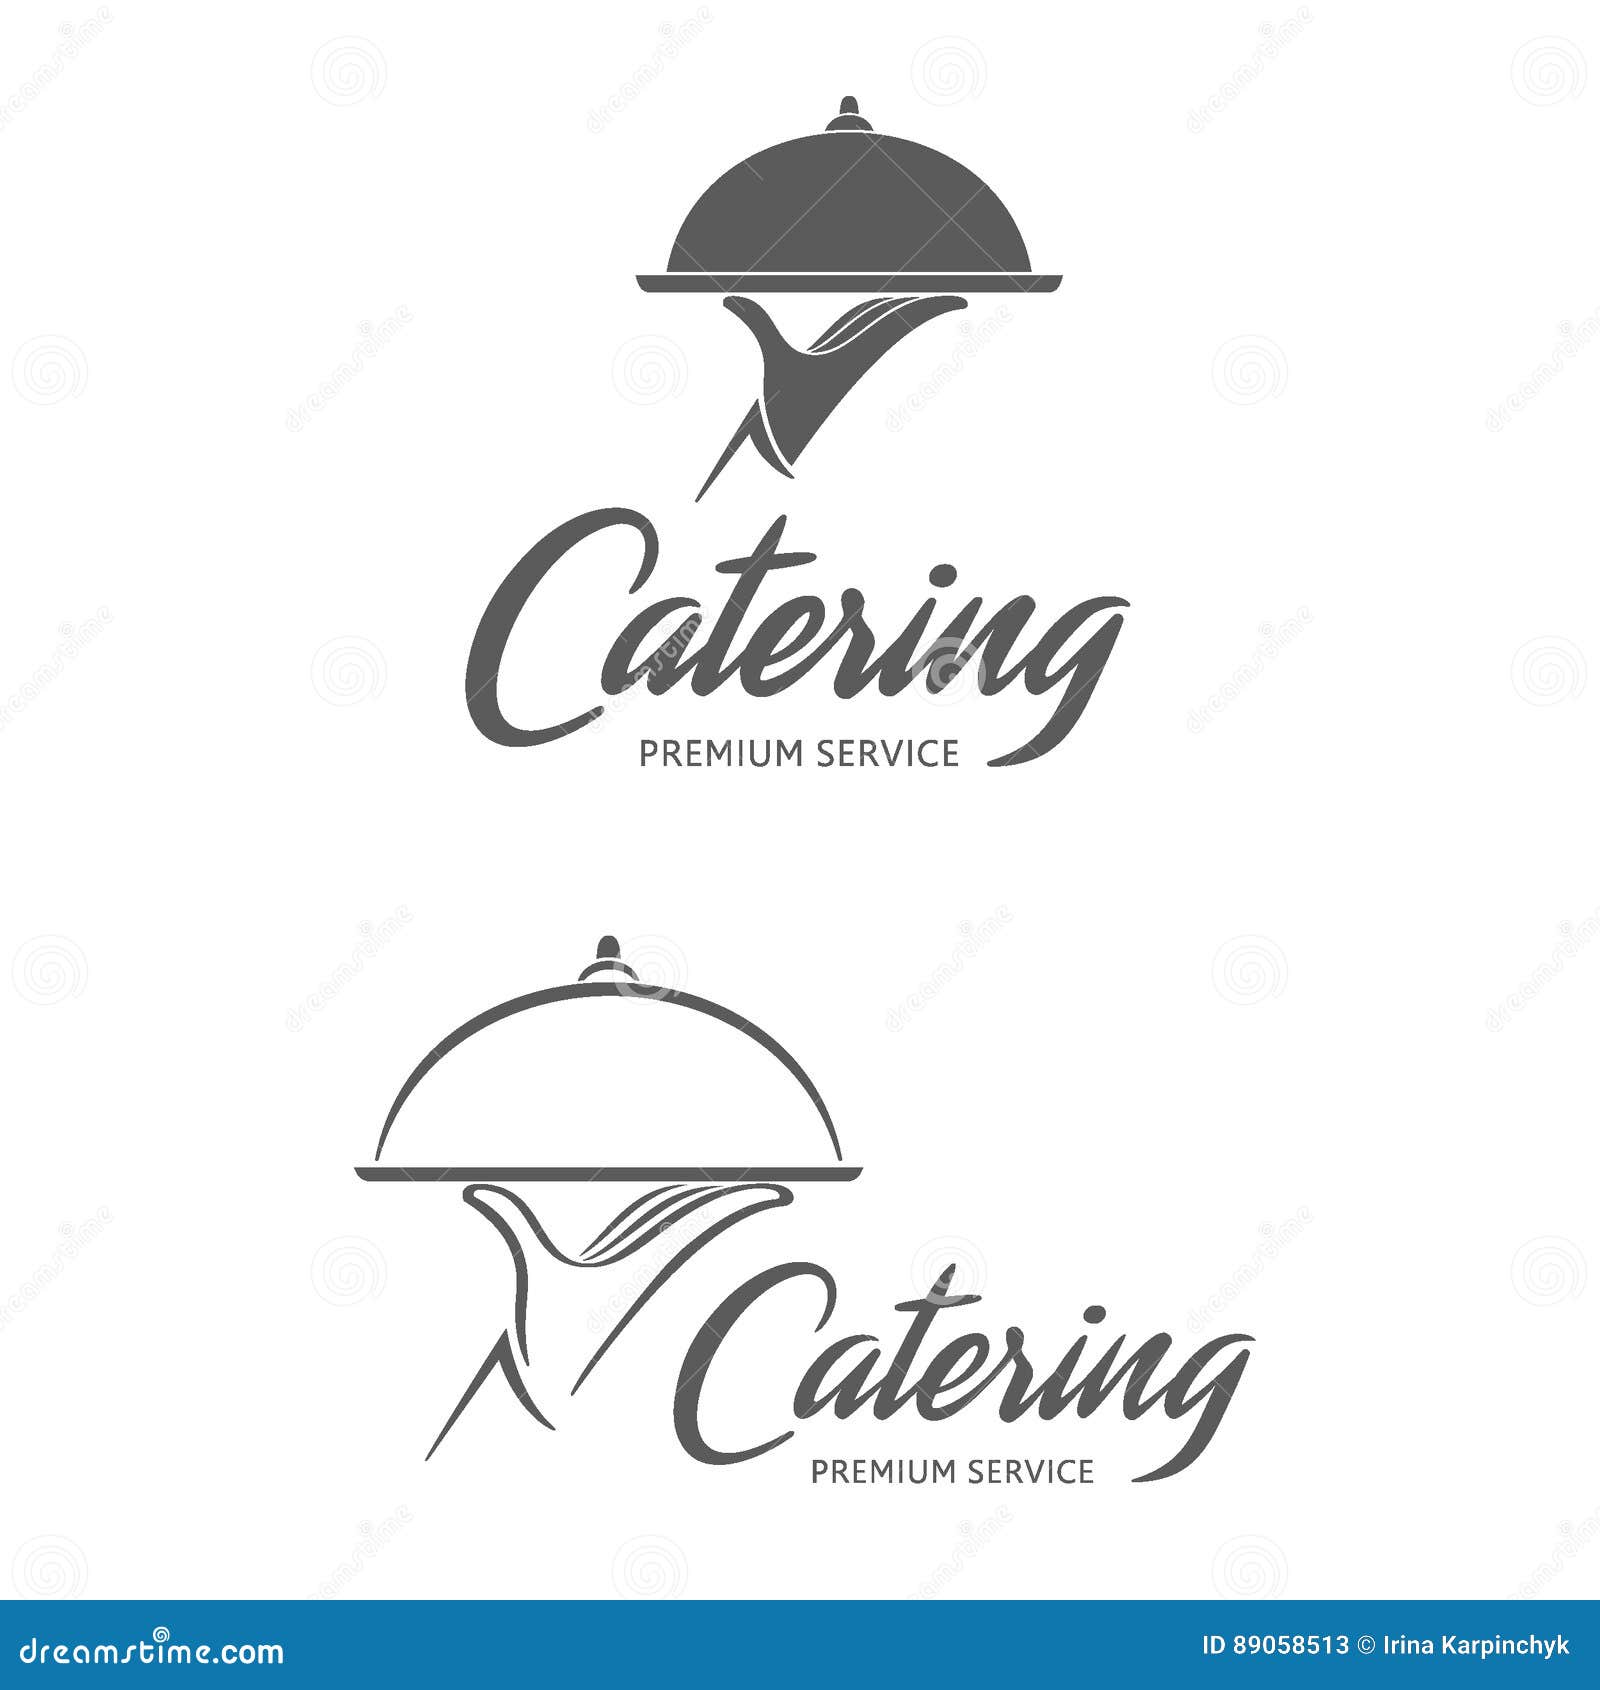  logo . catering service